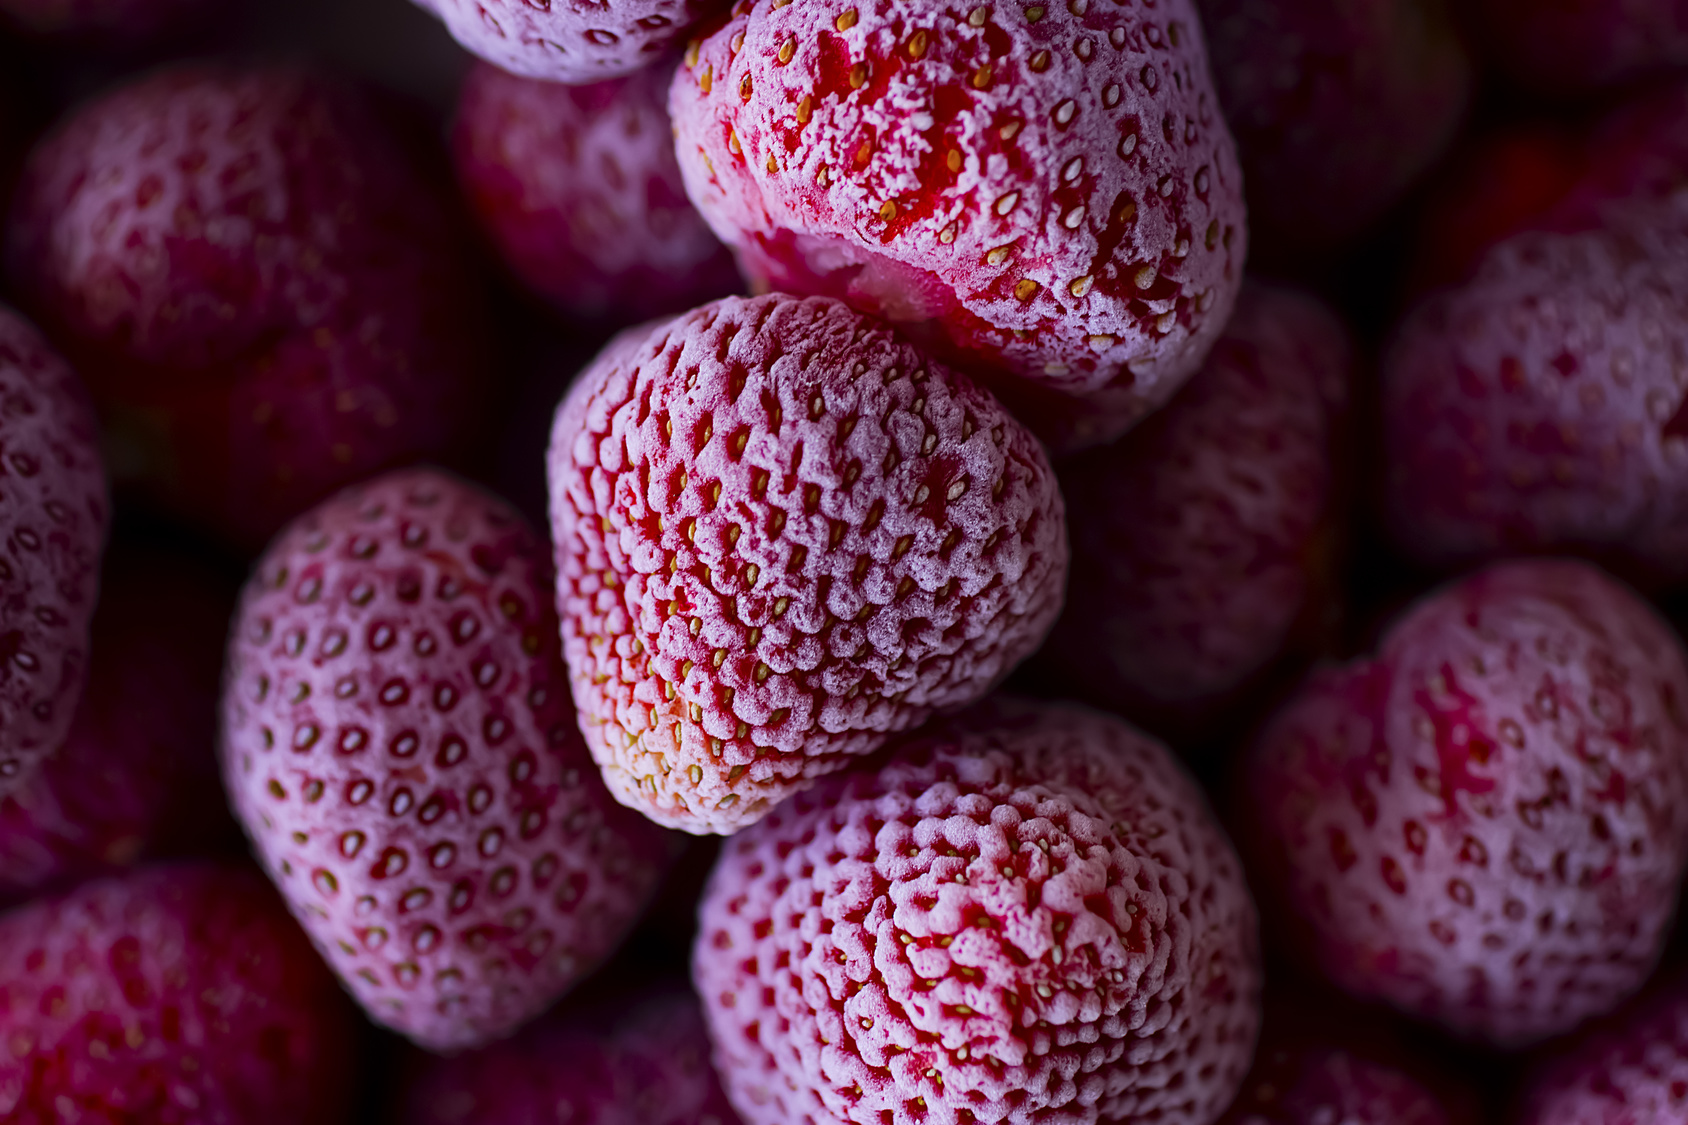 Frozen strawberry close-up. Food background.